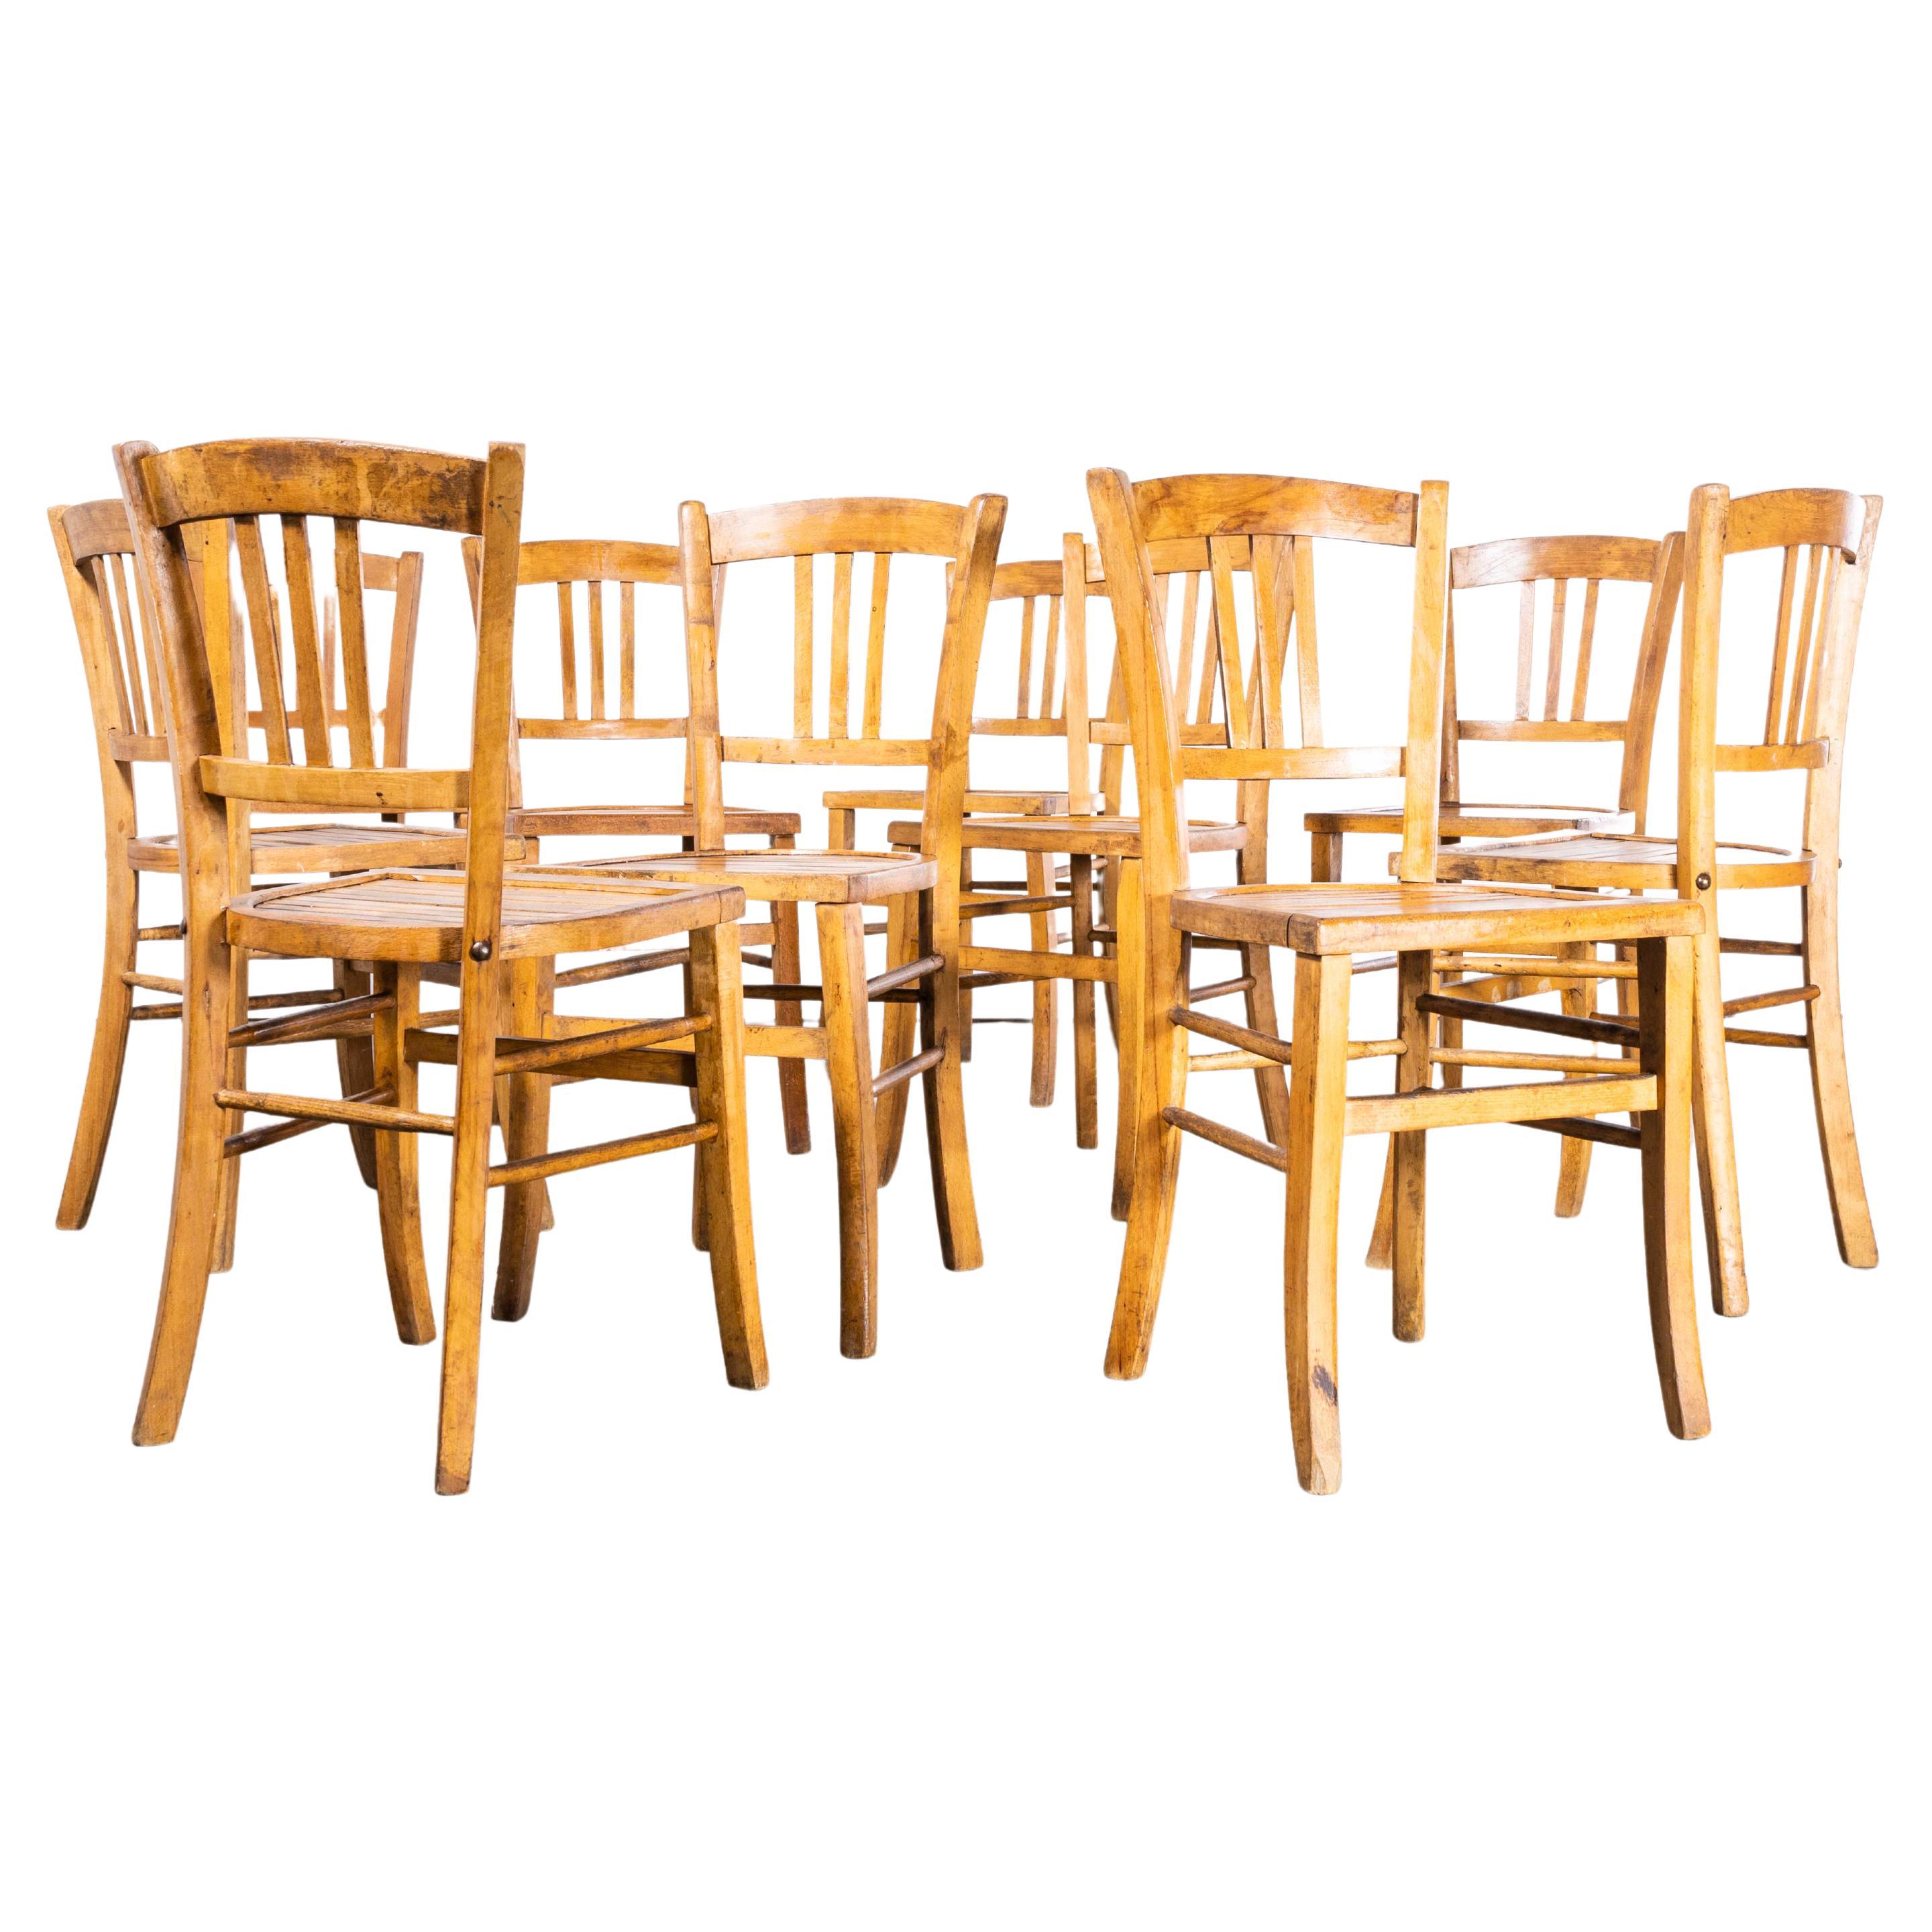 Original 1950's French Slatted Farmhouse Chairs From Provence - Set Of Ten en vente